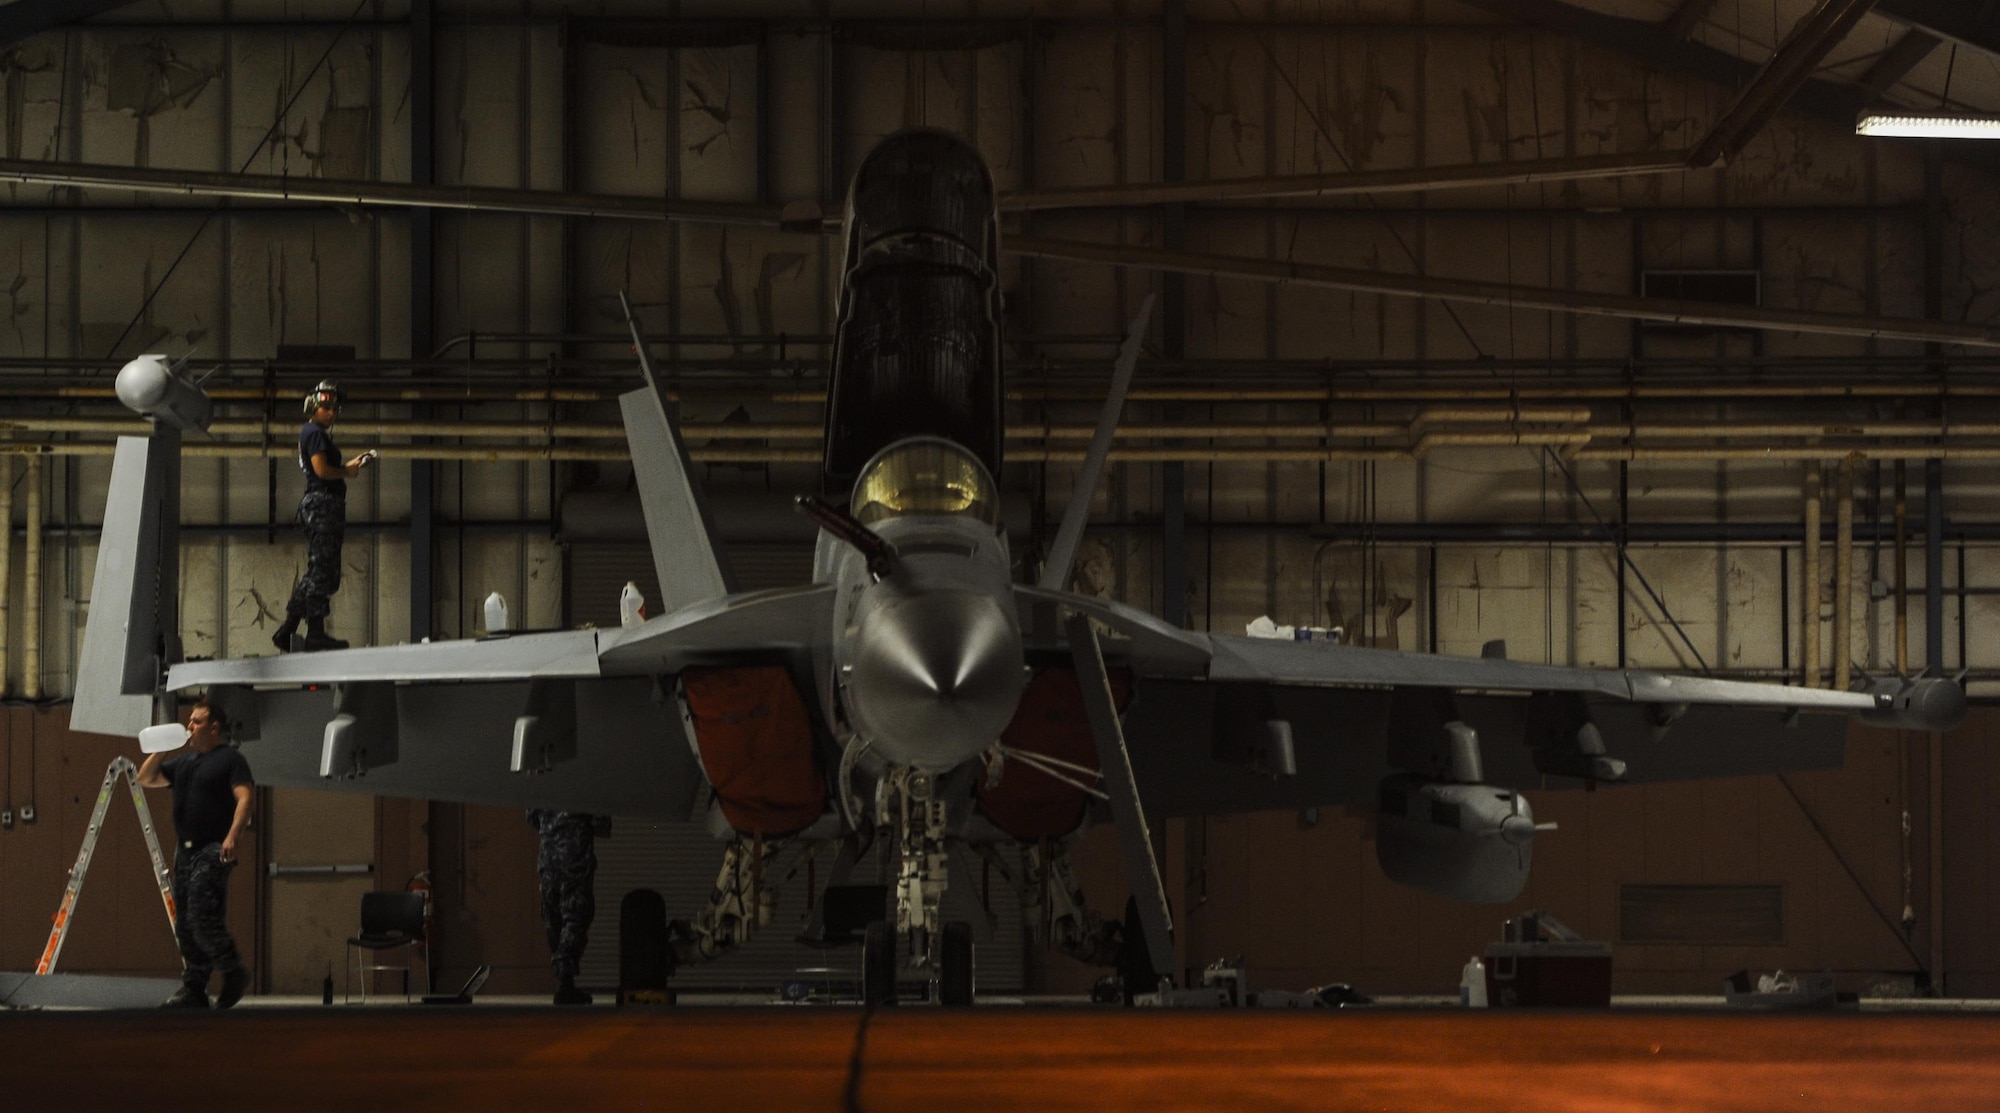 An EA-18G, assigned to the Electronic Attack Squadron 139, Whidbey Island Naval Air Station, WA., sits in a hangar as maintainers repair the aircraft during Red Flag 16-3 at Nellis Air Force Base, Nev. July 25, 2016. In addition to daytime operations, Red Flag conducts training exercises during hours of darkness to train for low visibility environment. (U.S. Air Force photo by Airman 1st Class Kevin Tanenbaum/Released)